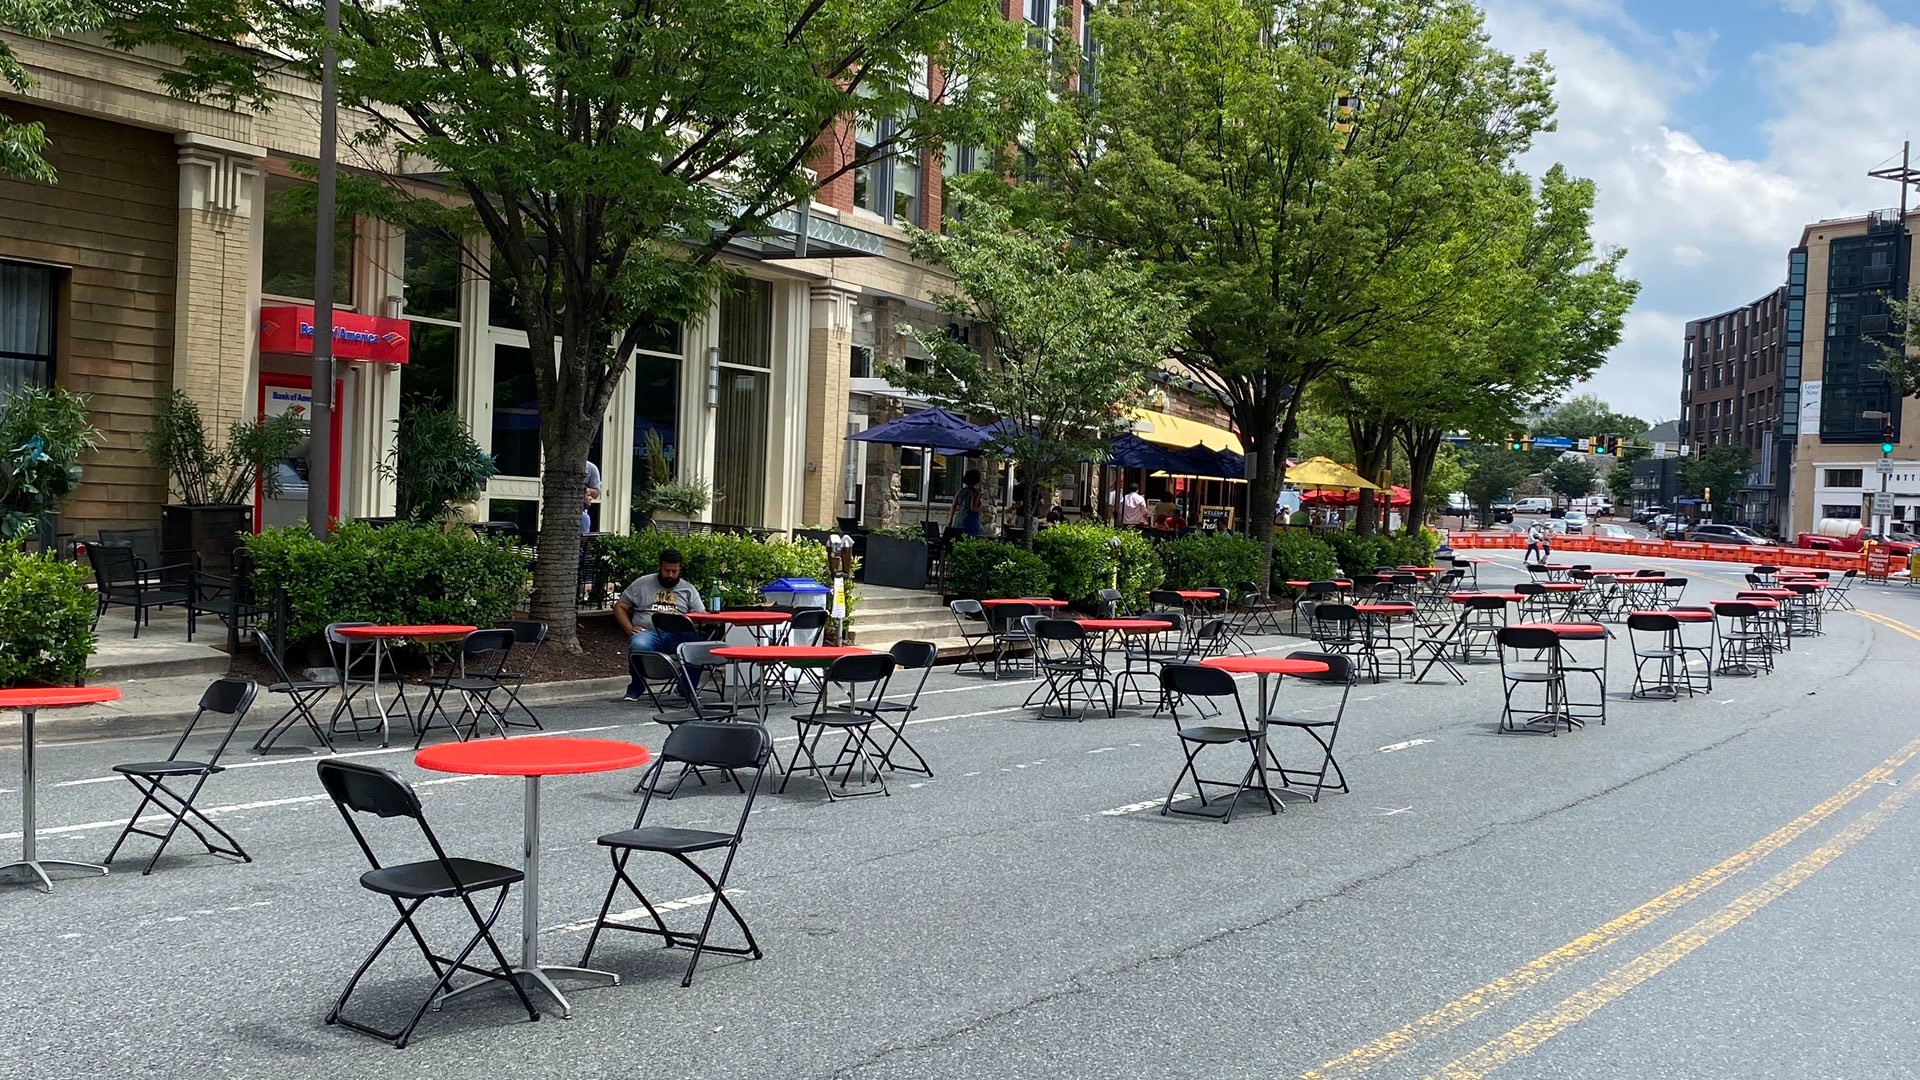 Several blocks in downtown Bethesda are closed to allow restaurants to expand outdoor dining to comply with COVID-19 social distancing guidelines.